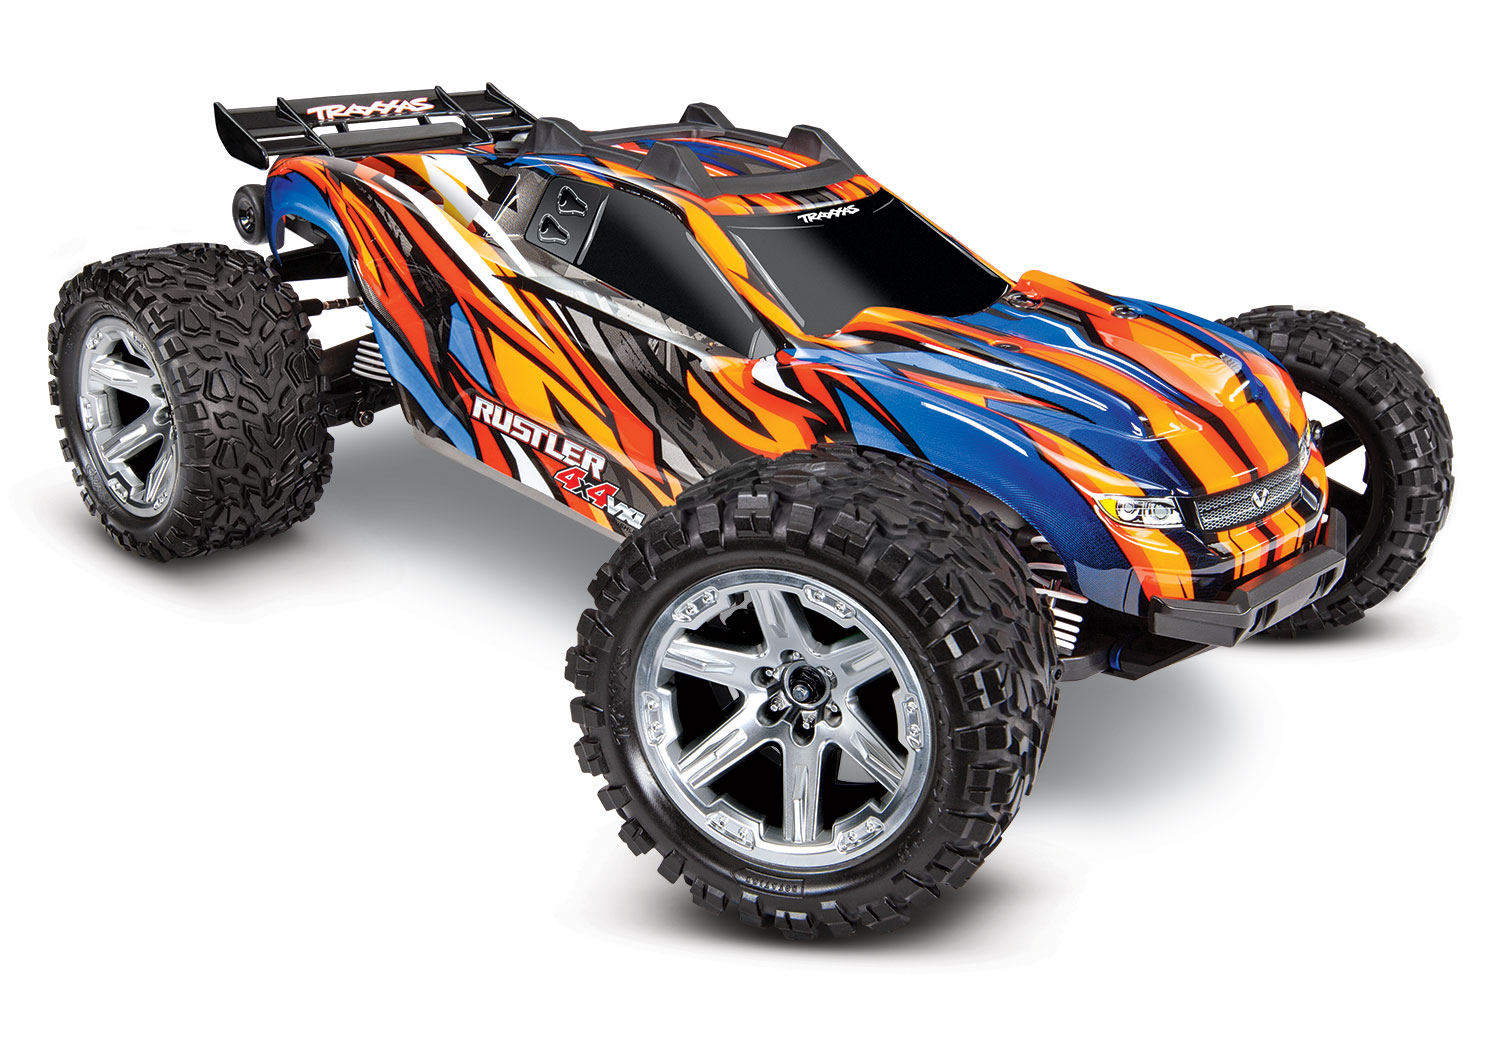 Schat Gezondheid advocaat RUSTLER 4X4 4WD VXL BRUSHLESS 1/10th Scale Truggy RTR TRA670764 -  Fundemonium